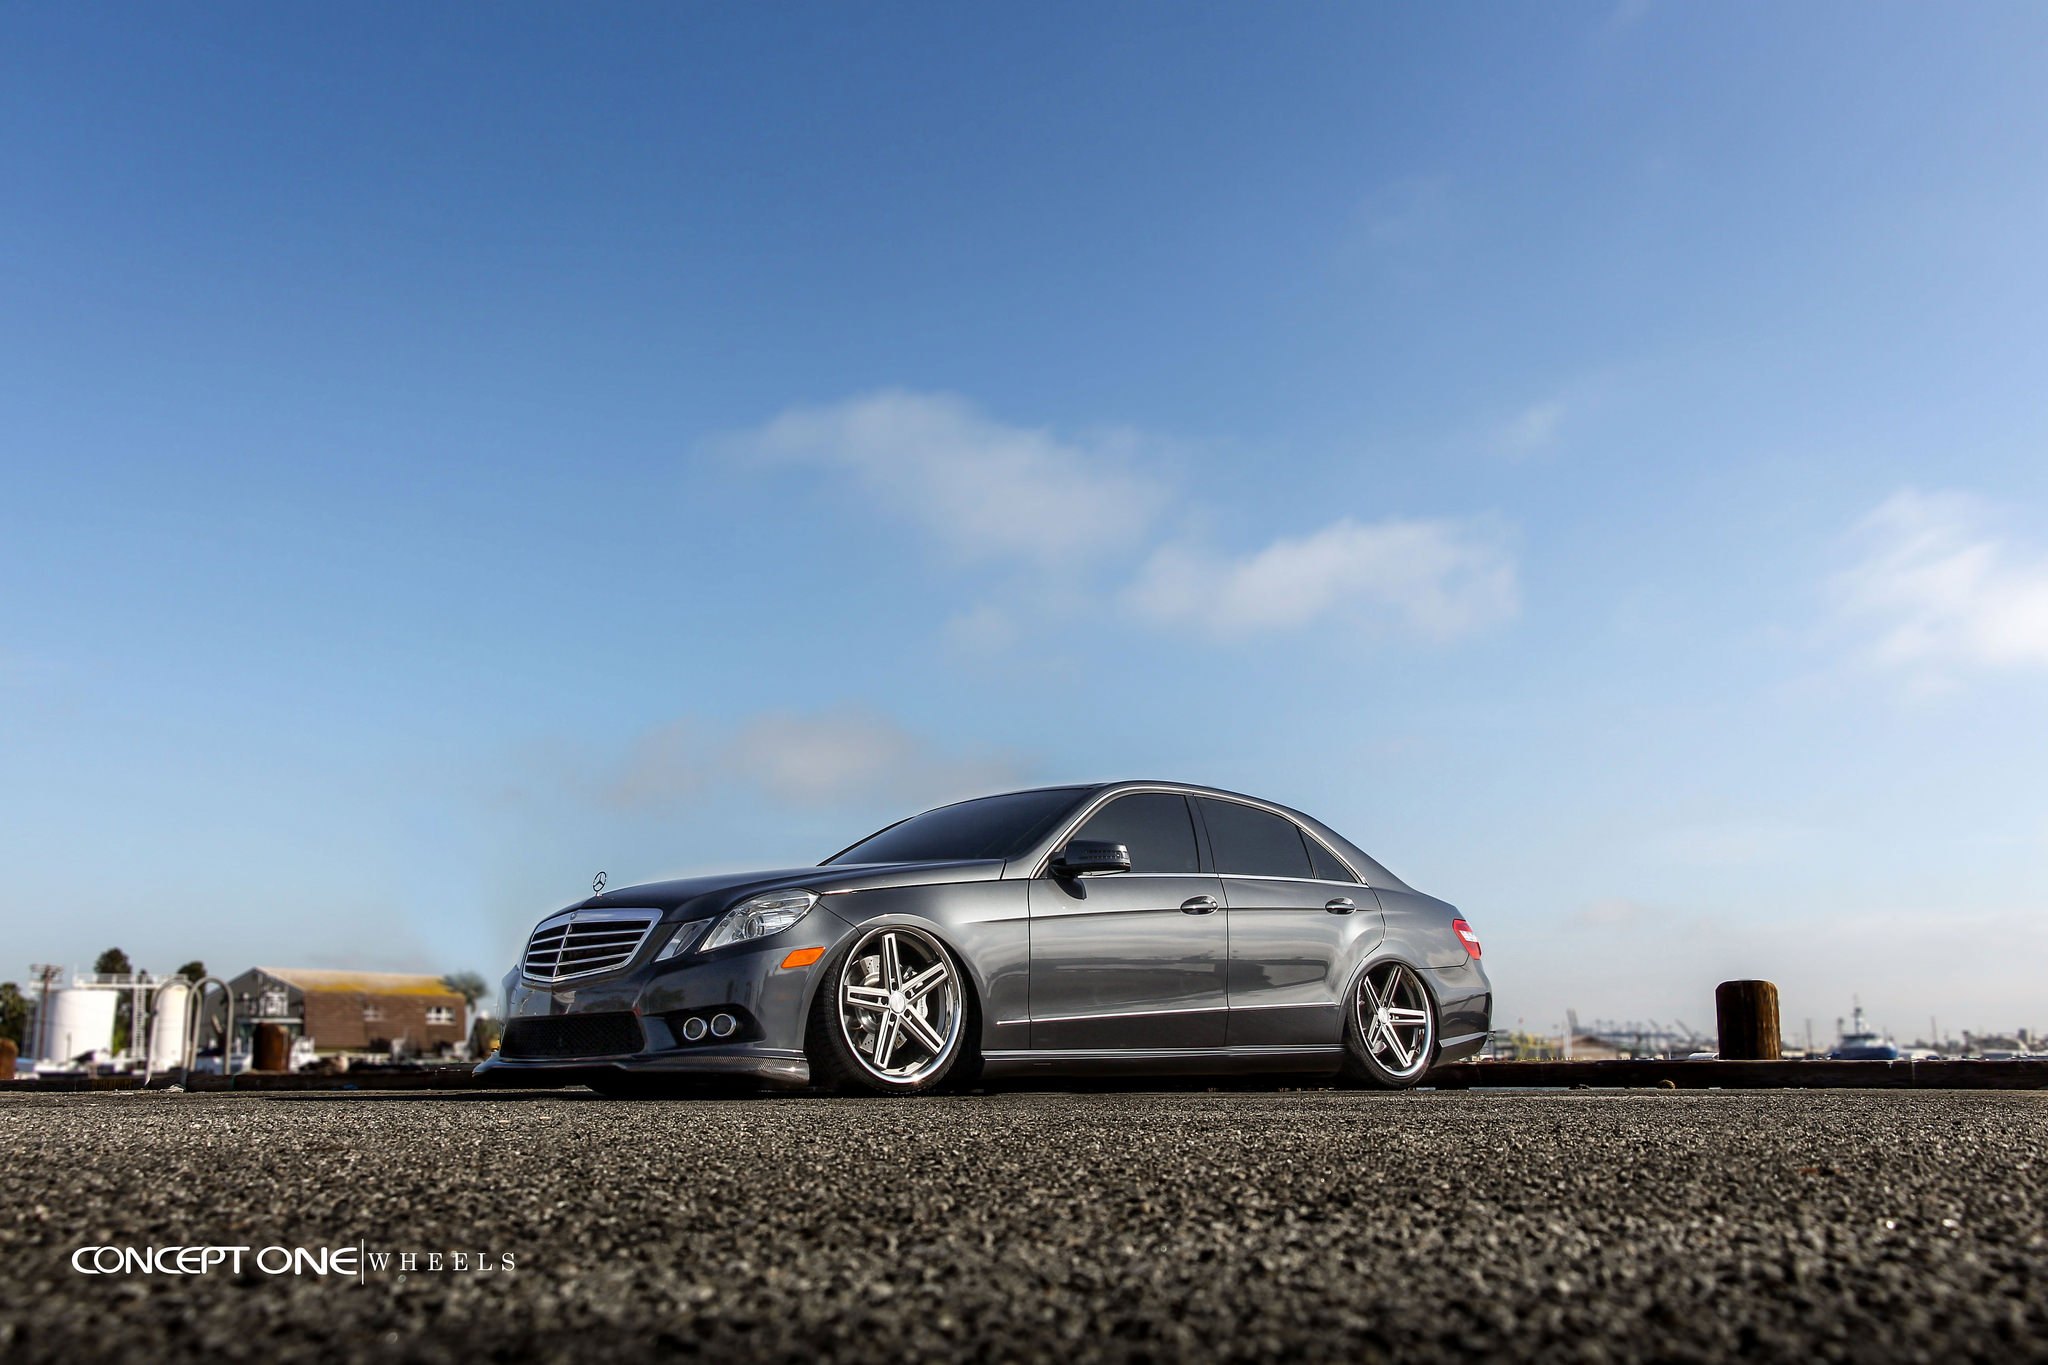 Gray Mercedes E-Class with Polished Concept One Wheels - Photo by Concept One